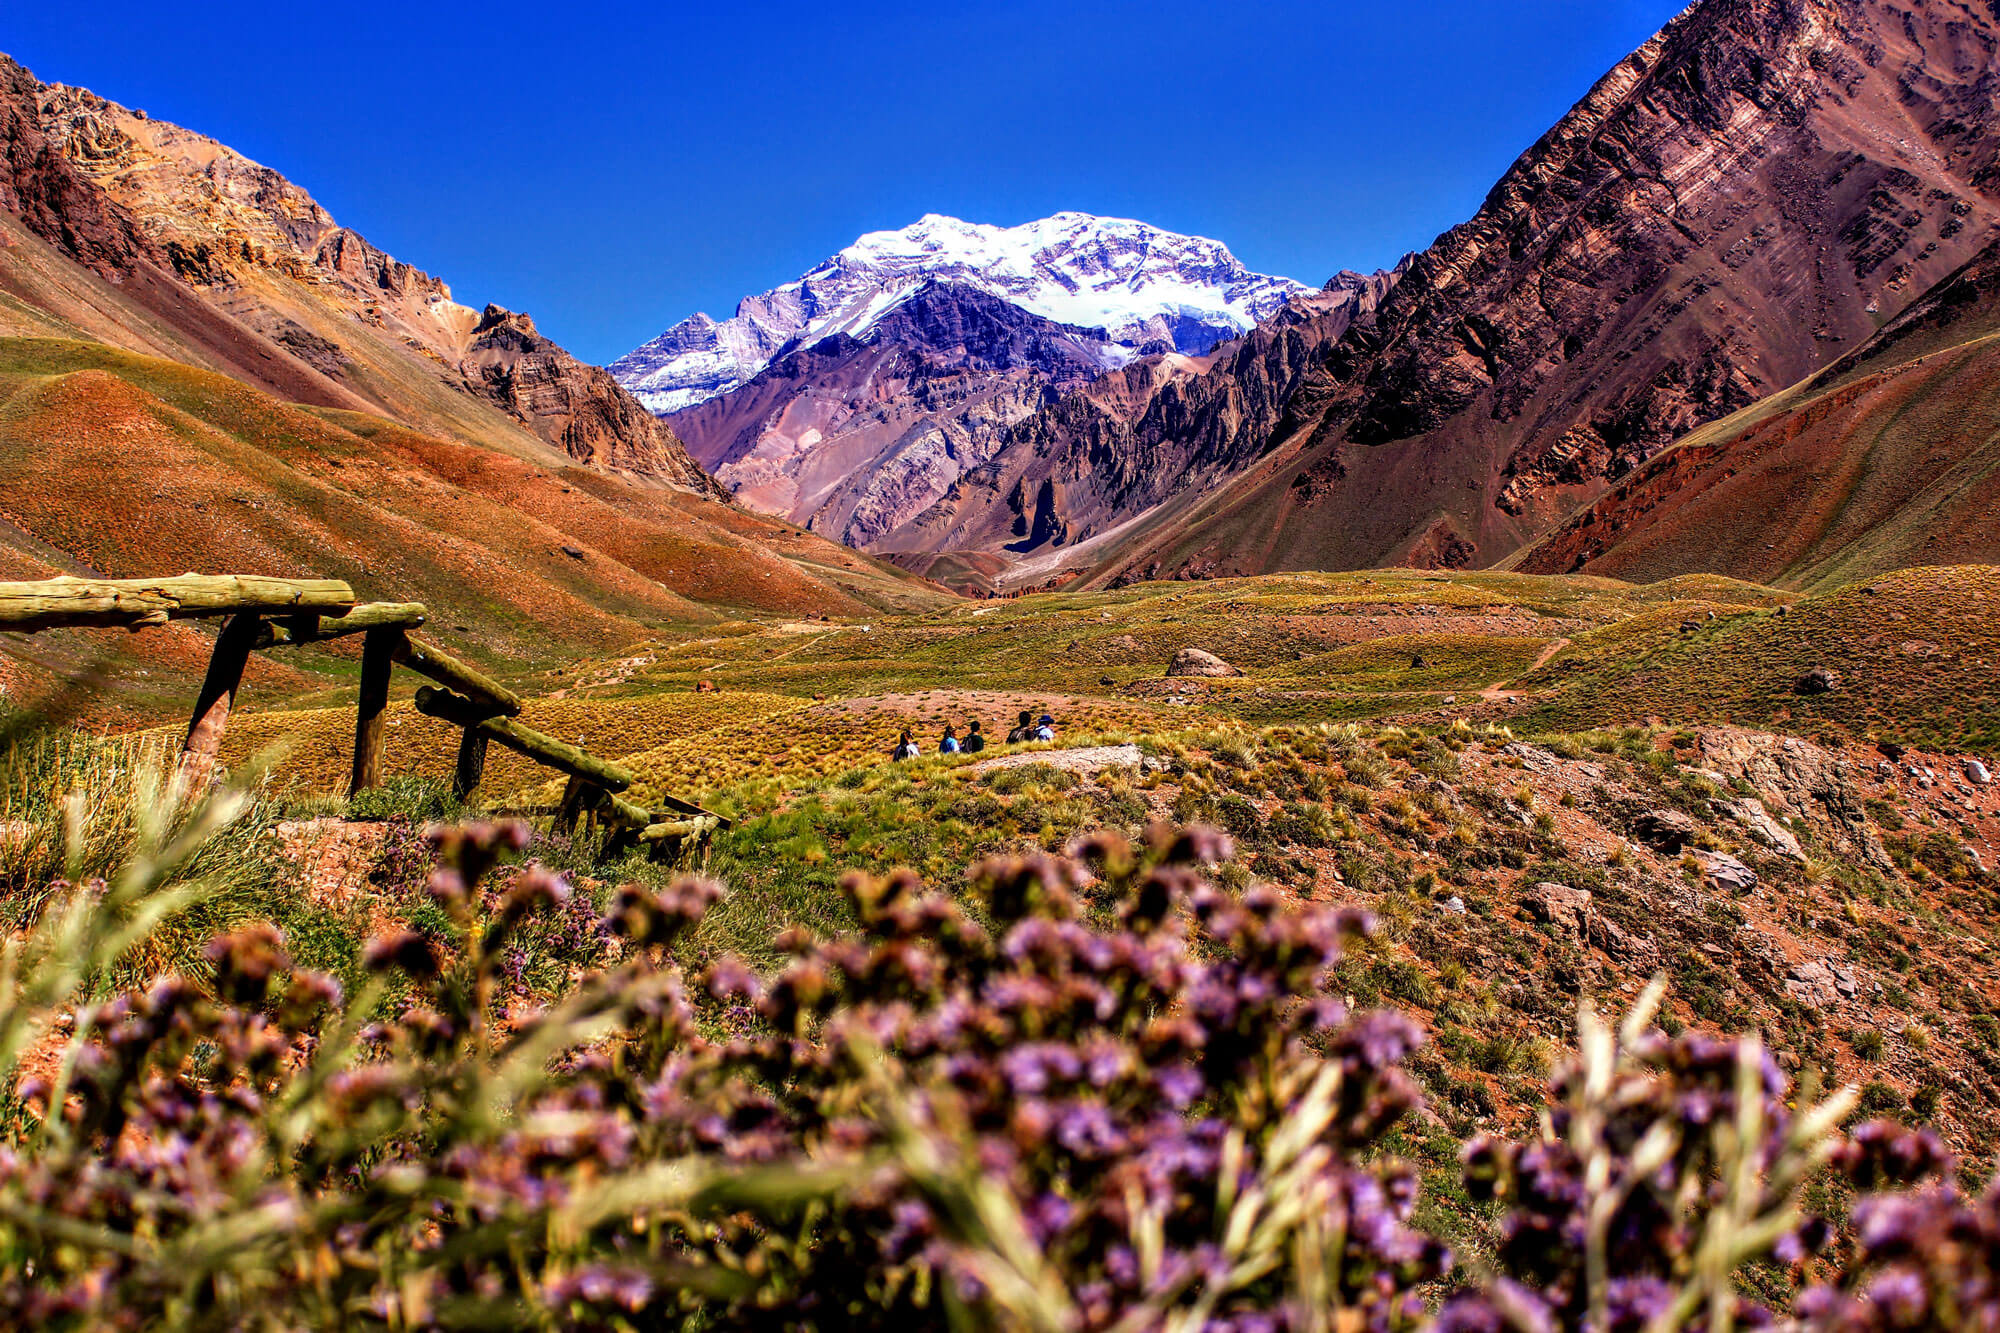 Aconcagua - Highest Mountain in South America